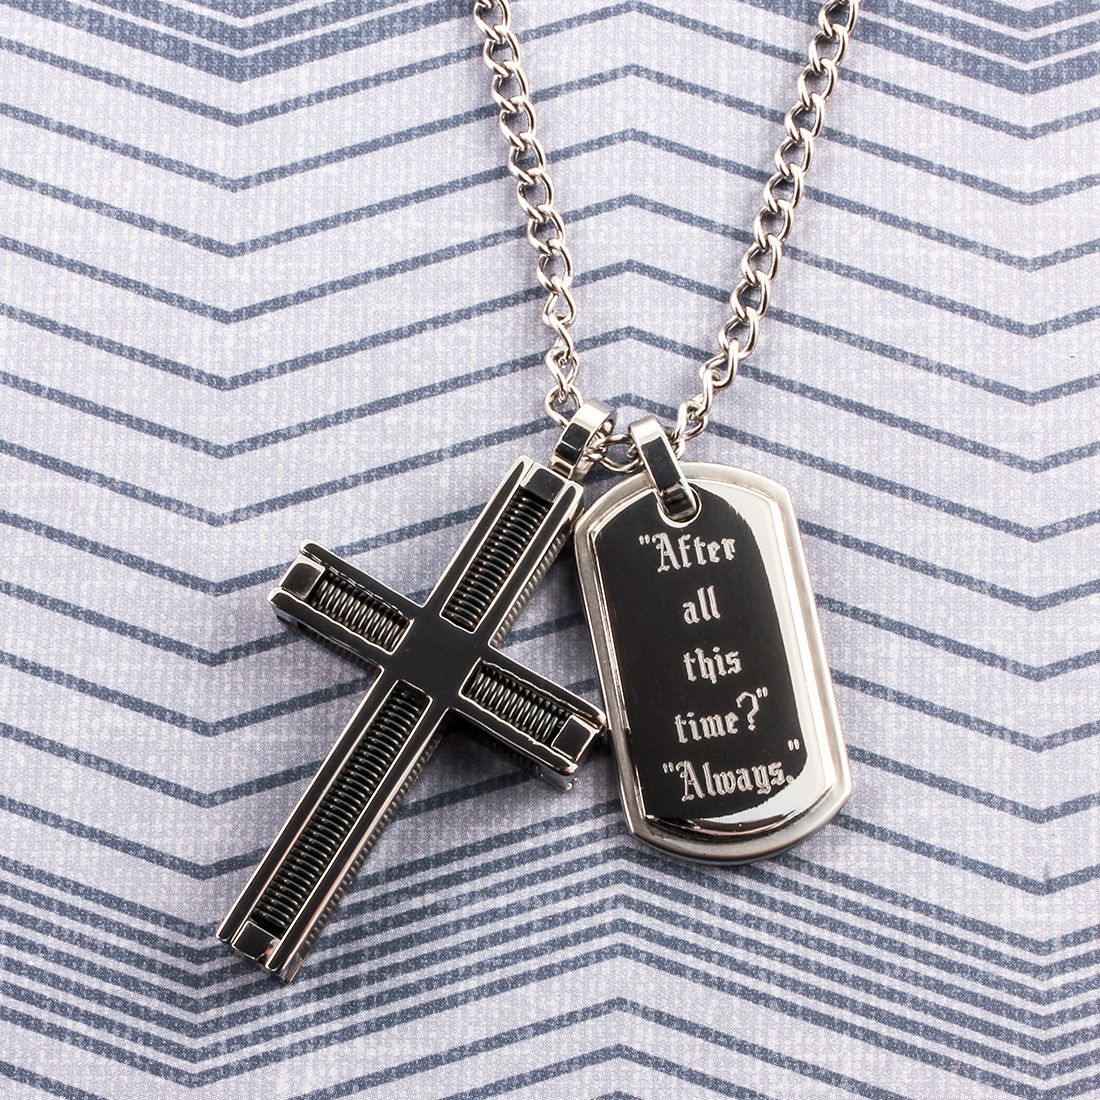 Spring Cross and Tag Pendant Set on Chain